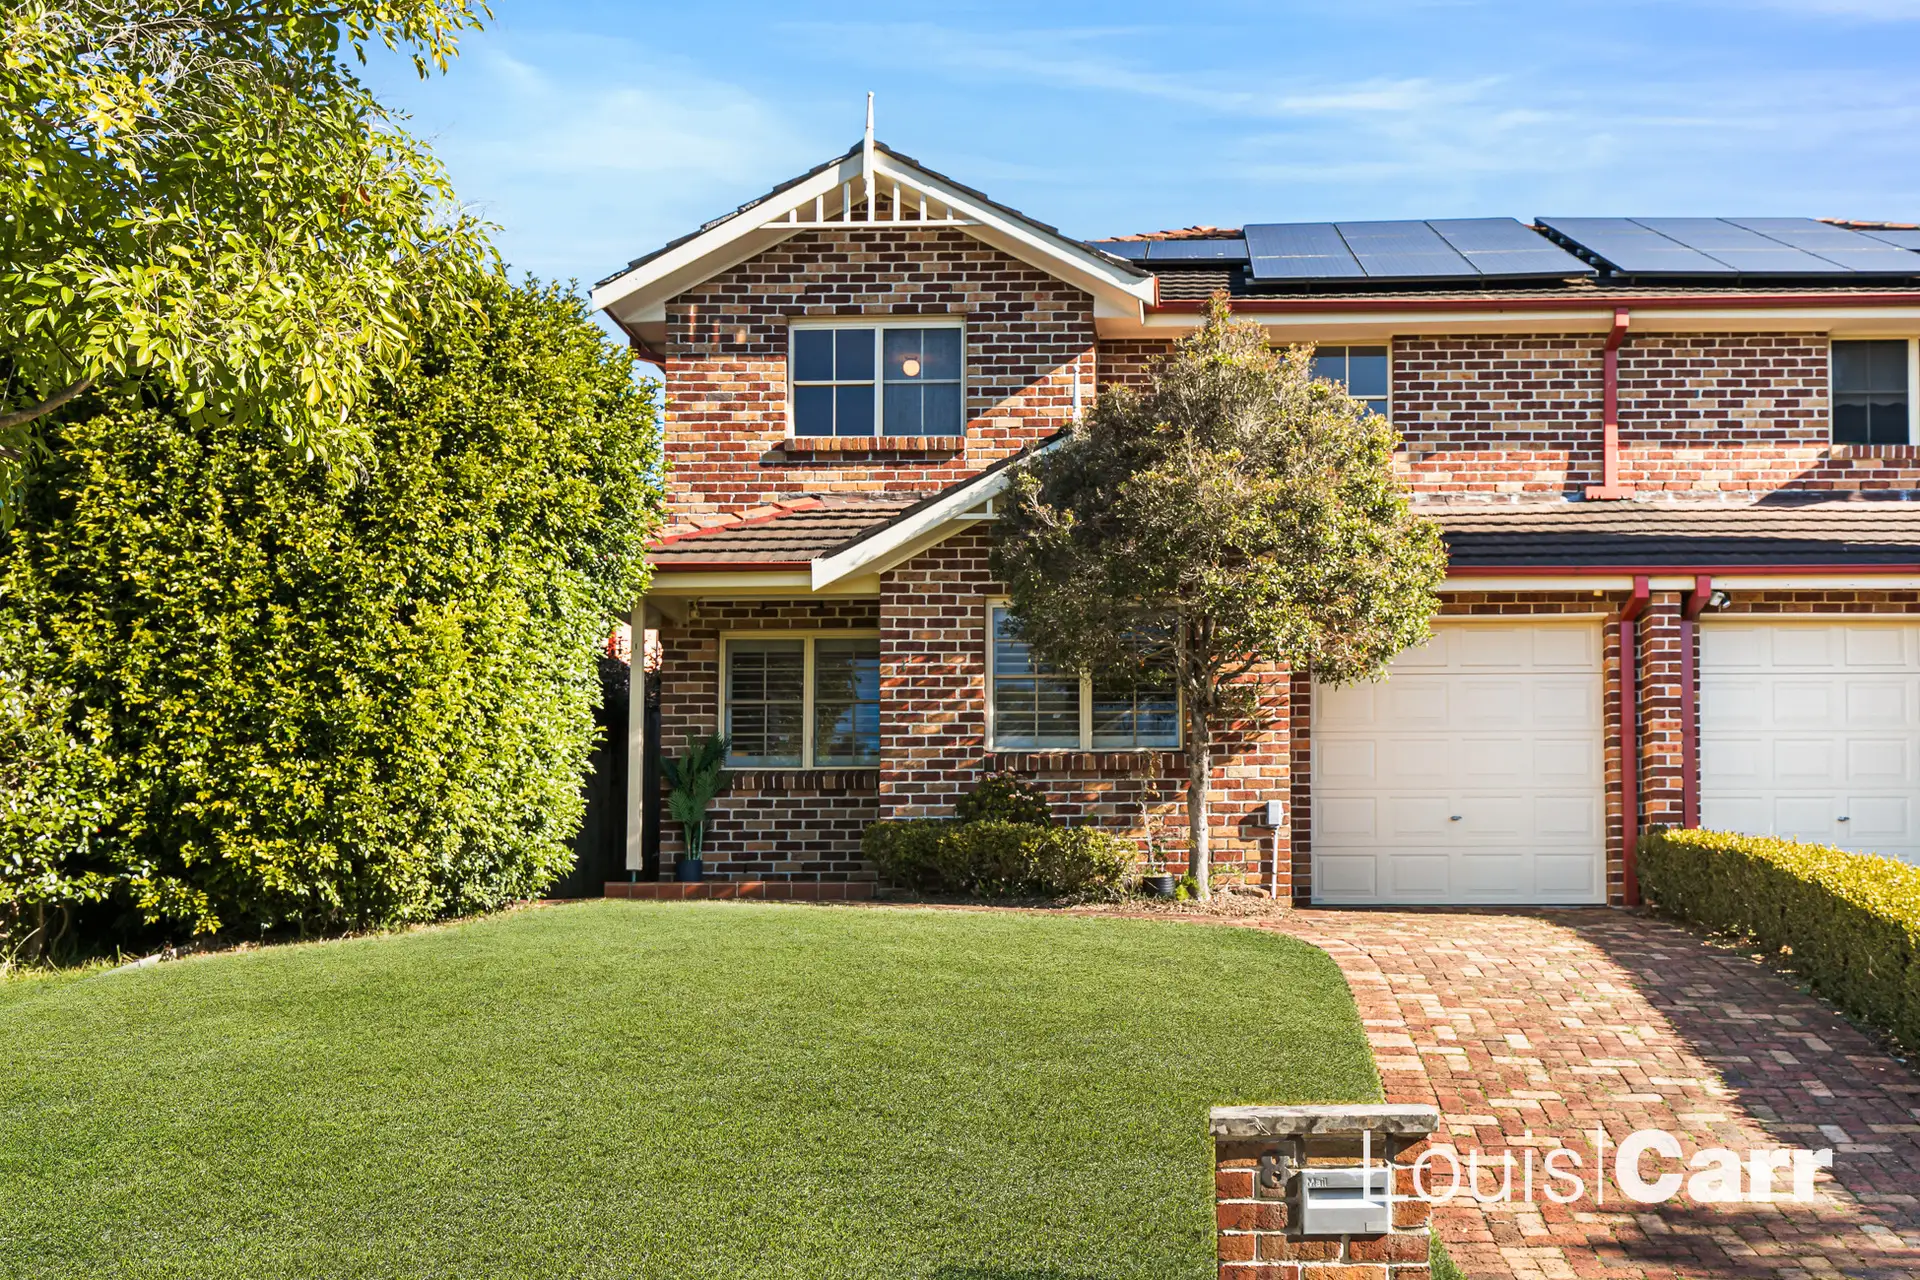 Photo #1: 1/8 Haven Court, Cherrybrook - Sold by Louis Carr Real Estate